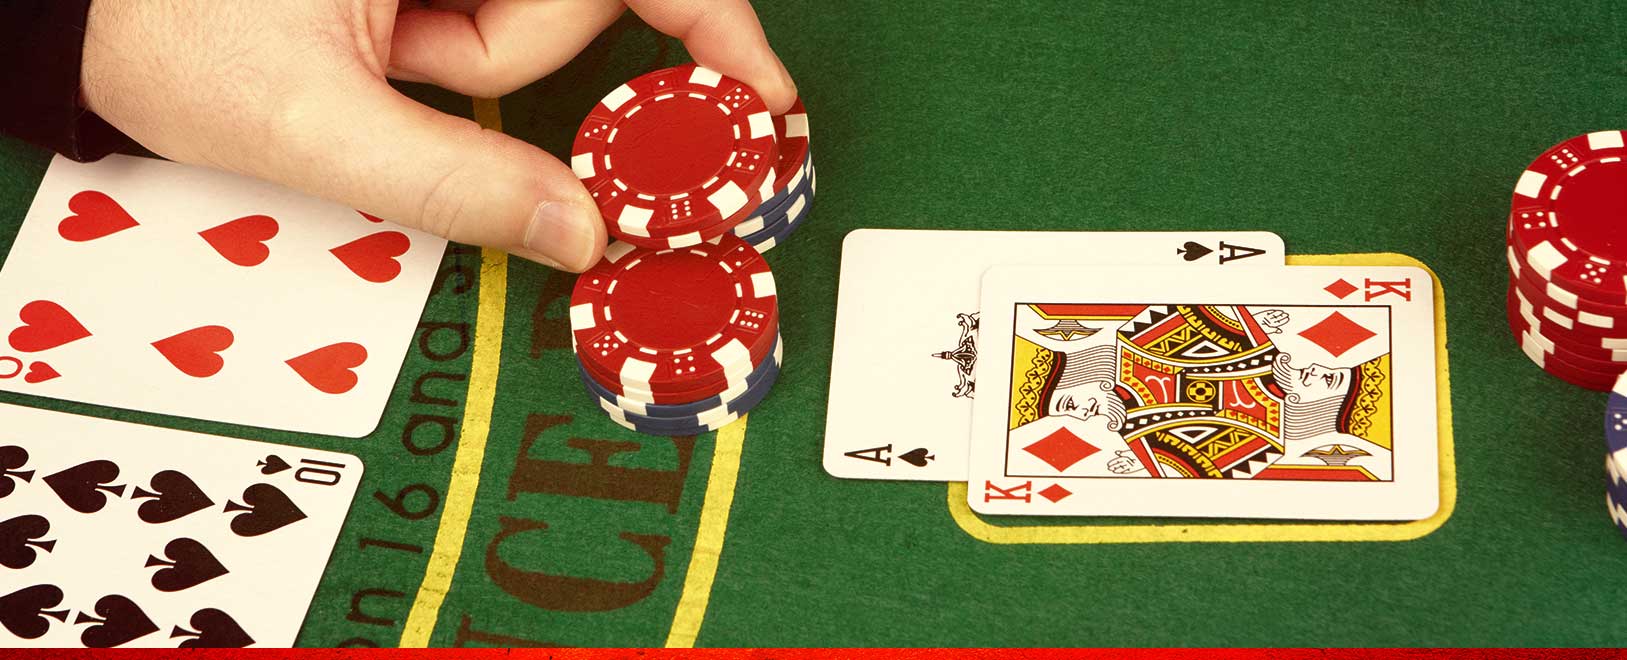 how to play blackjack double down